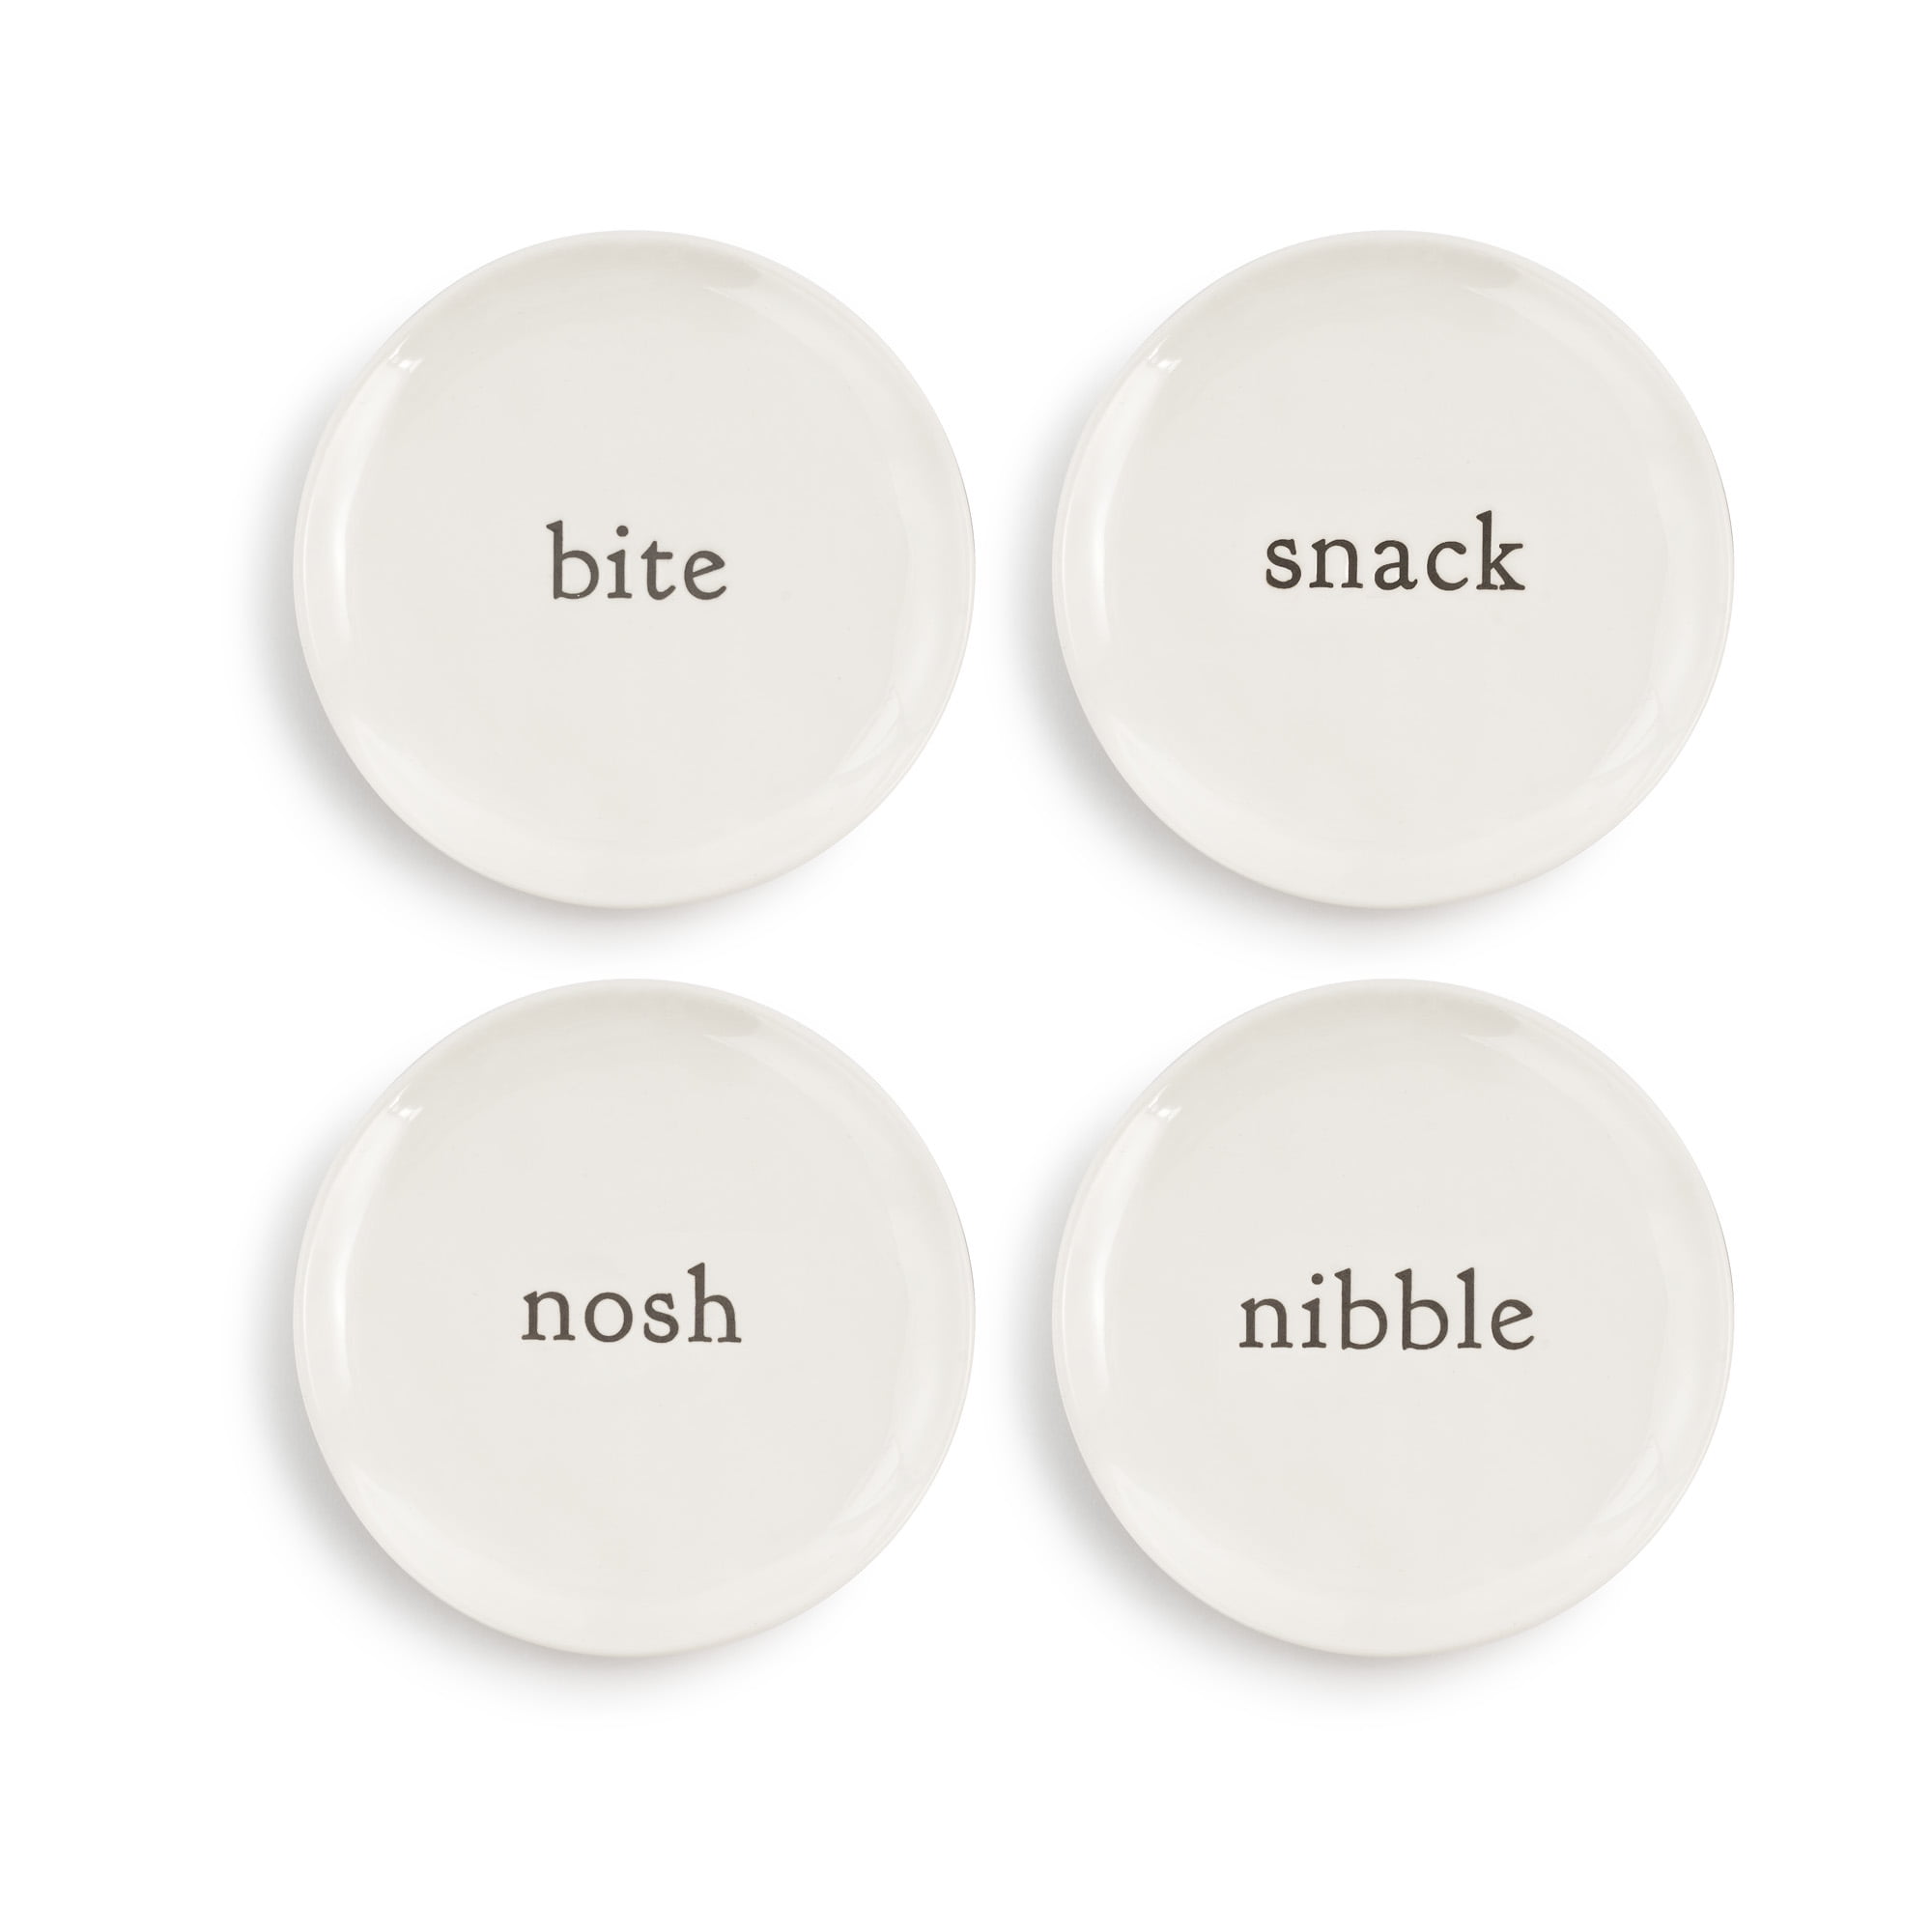 DEMDACO Snack Nibble Classic White 5 x 5 Inch Stoneware Appetizer Plate Set of 4